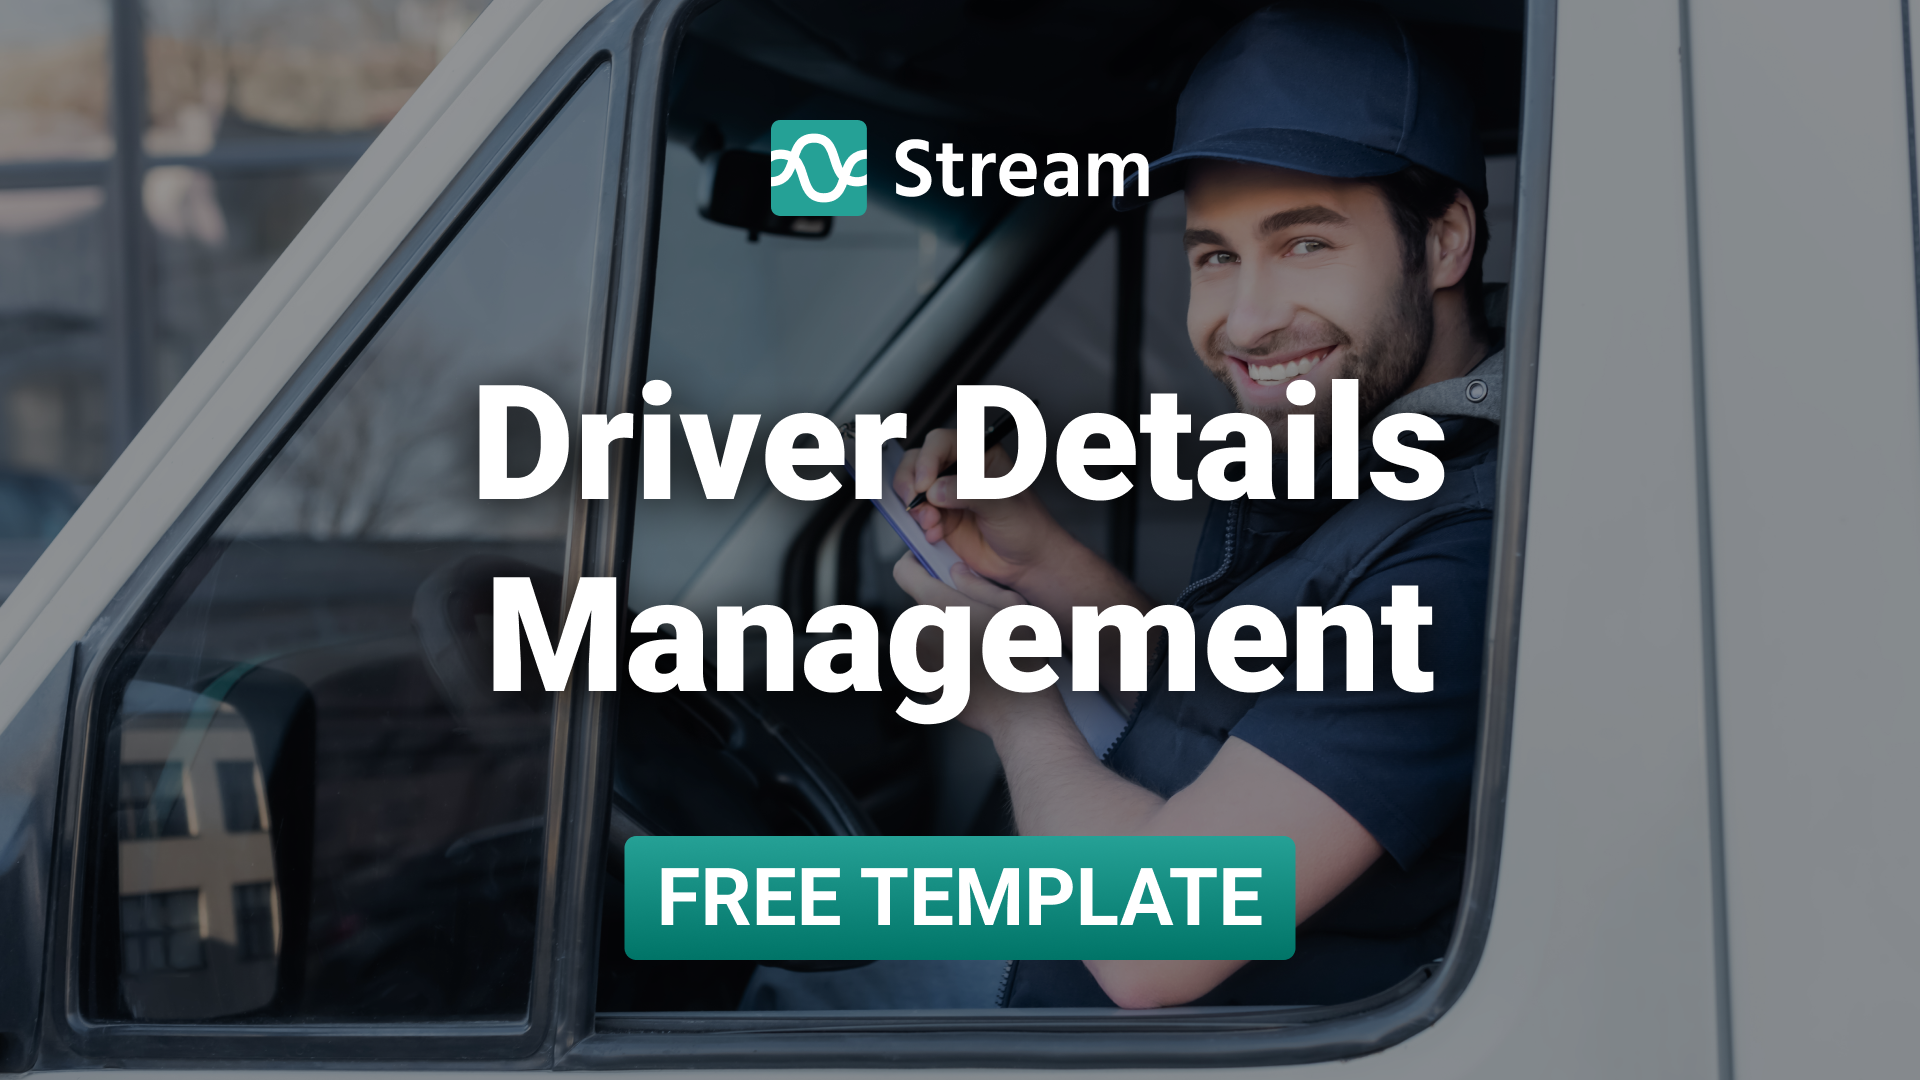 Driver-Details-Management-Template-FREE-Download-Featured-Image